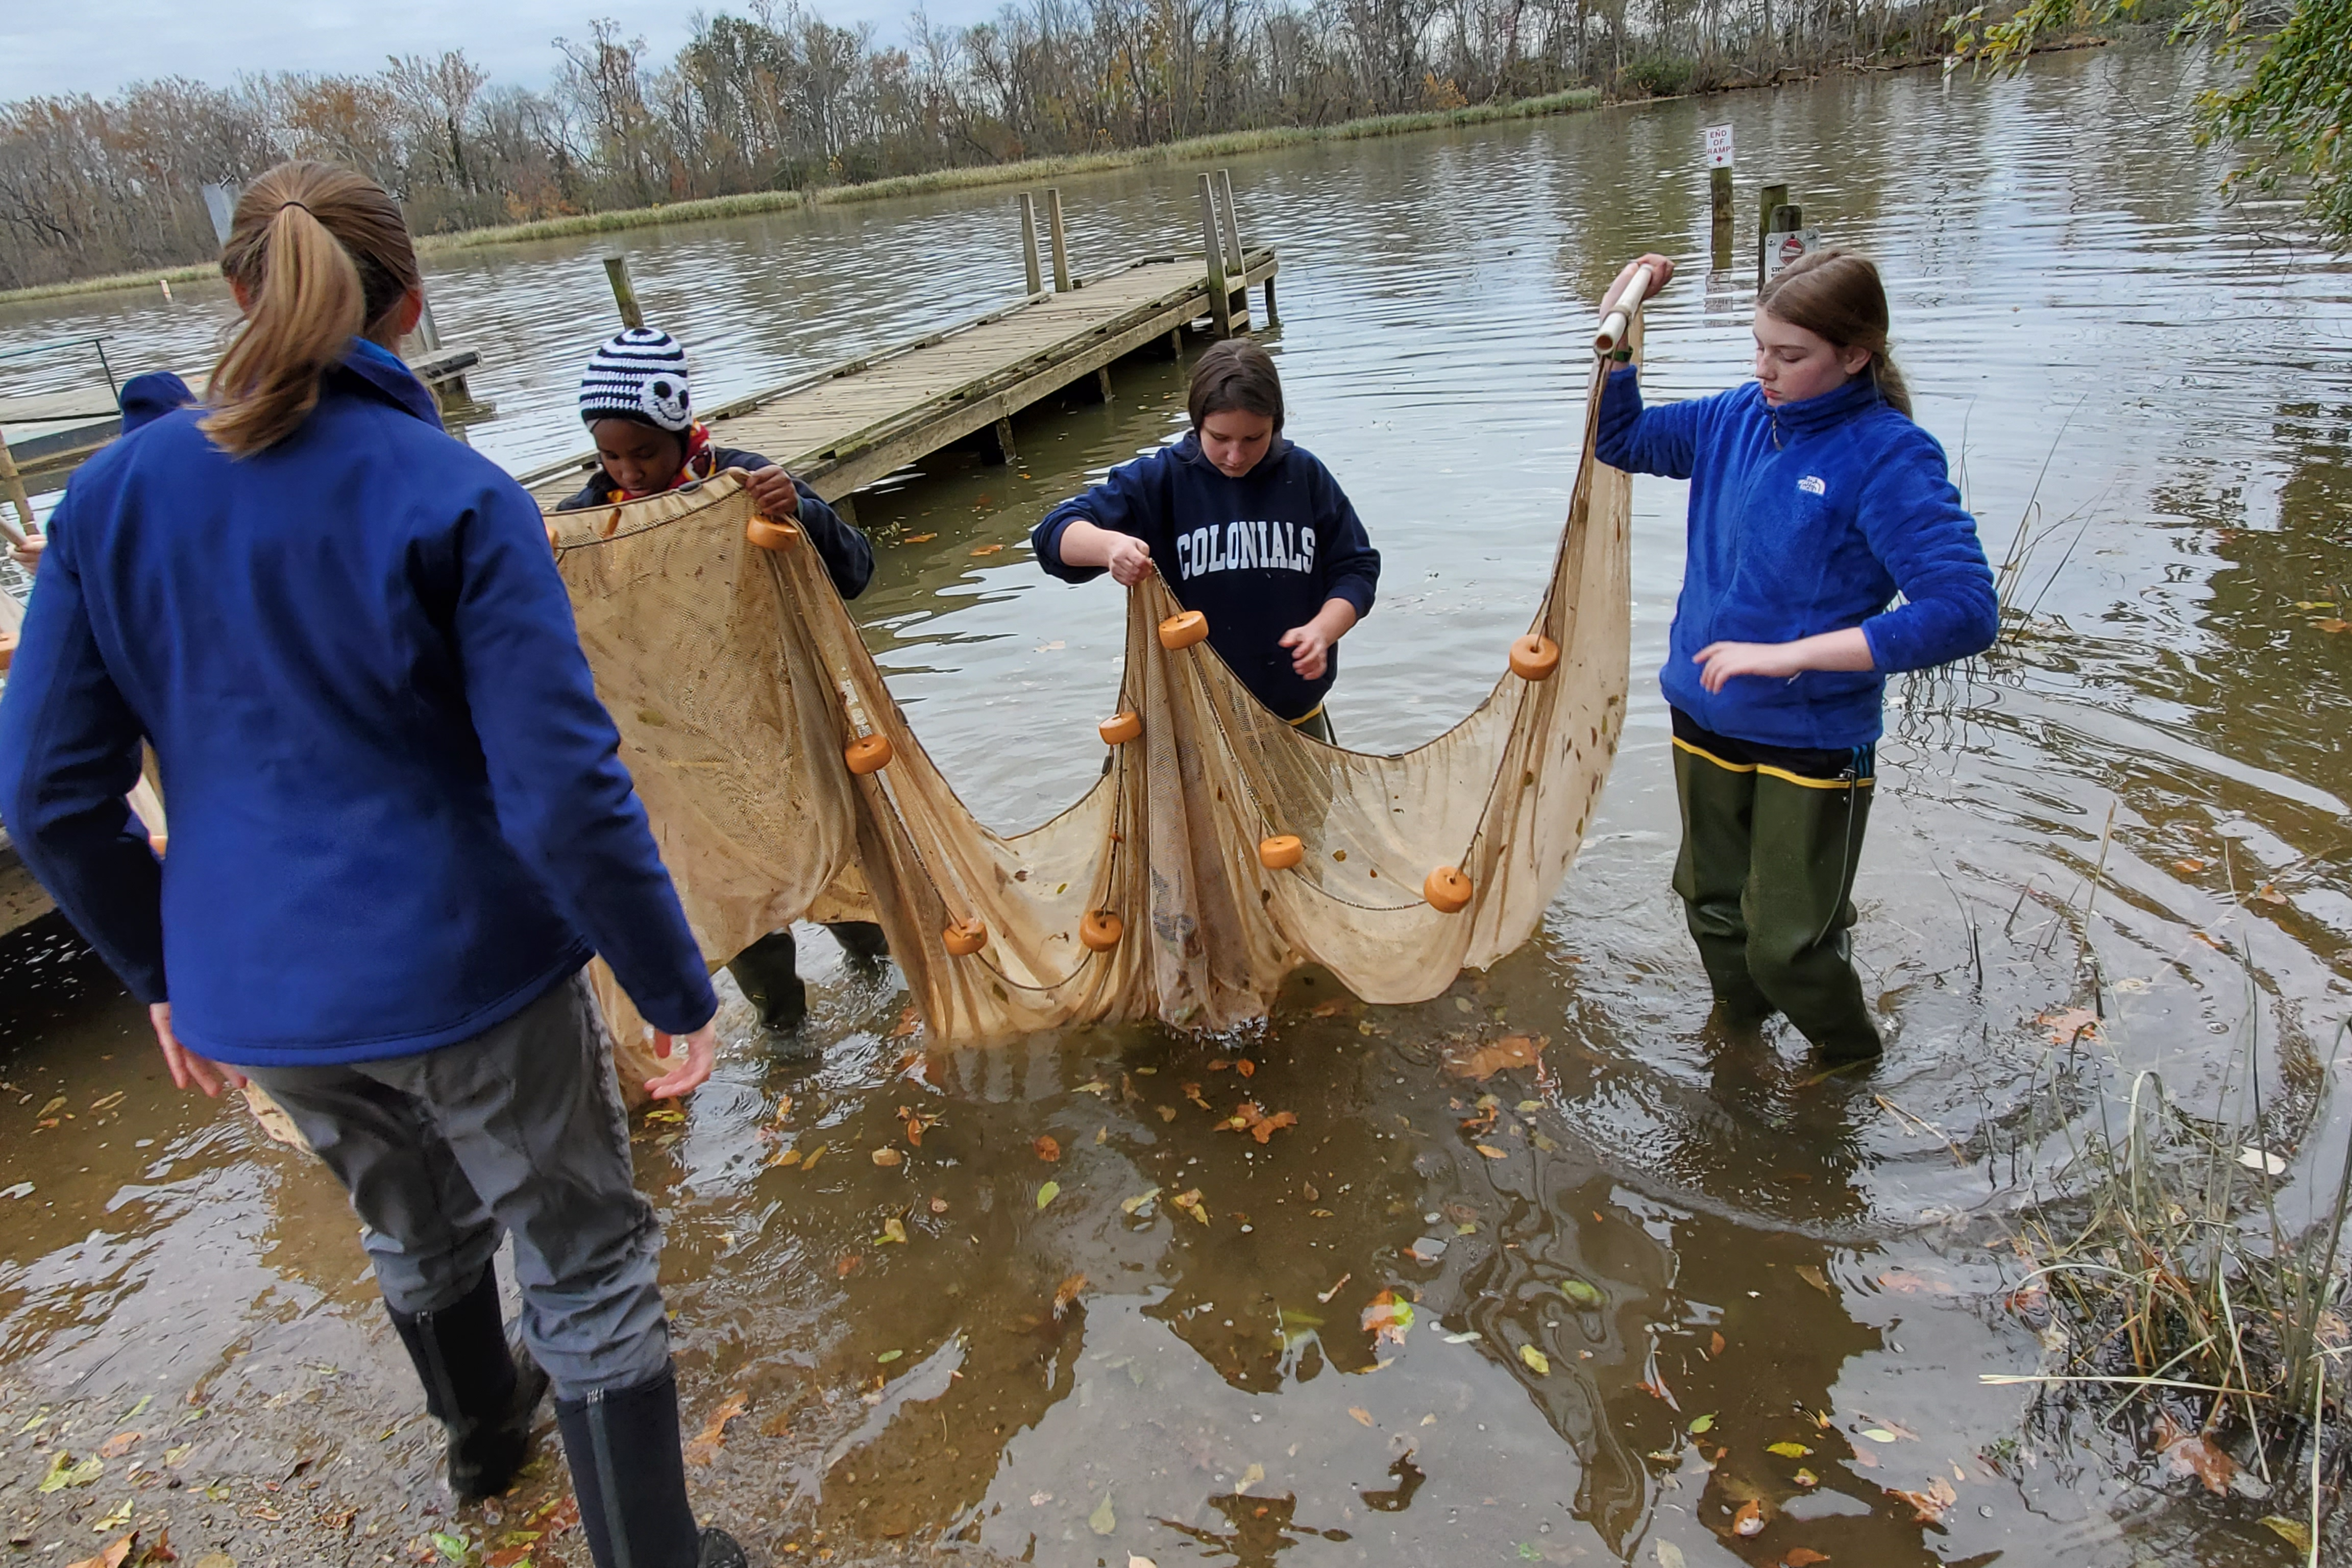 Students wearing waders stand in the water of the Appomattox River holding a fishing net together